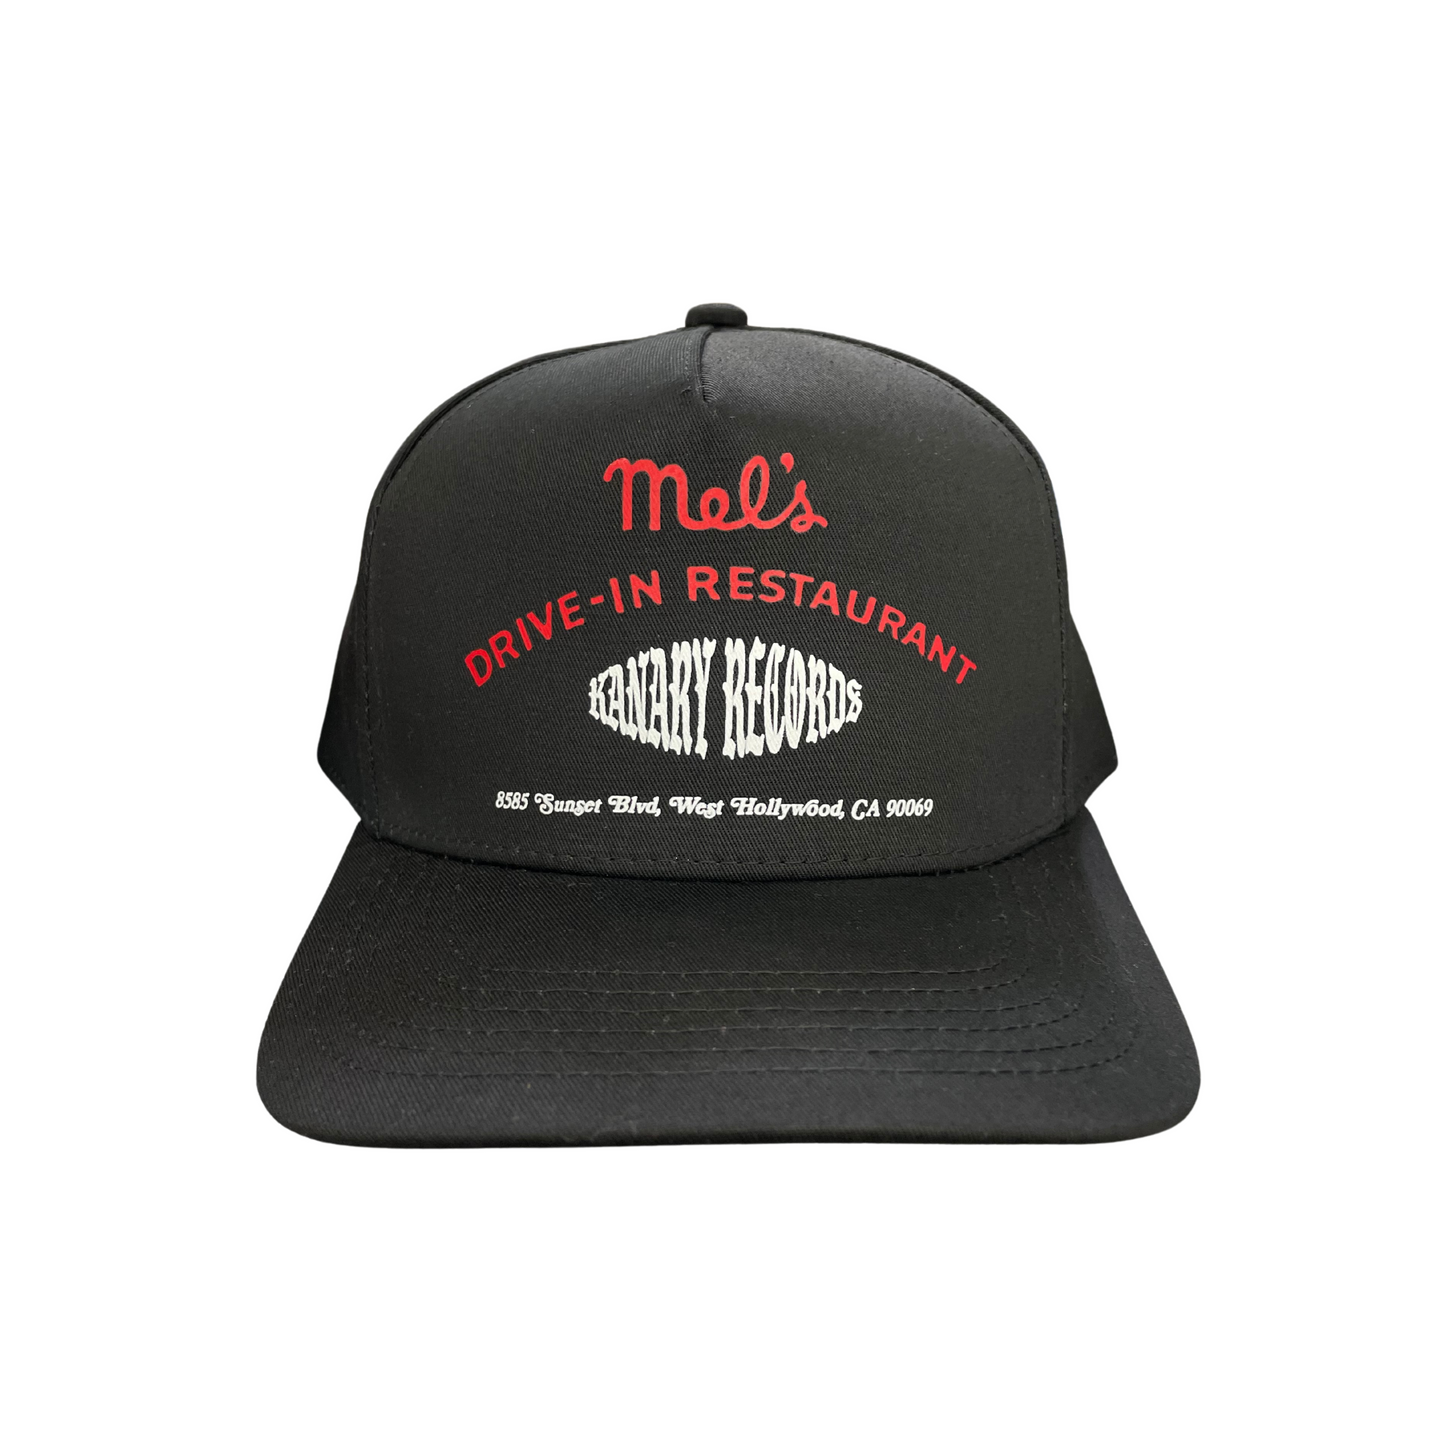 Kanary Trucker Hat (Limited edition Mel's Diner collaboration)